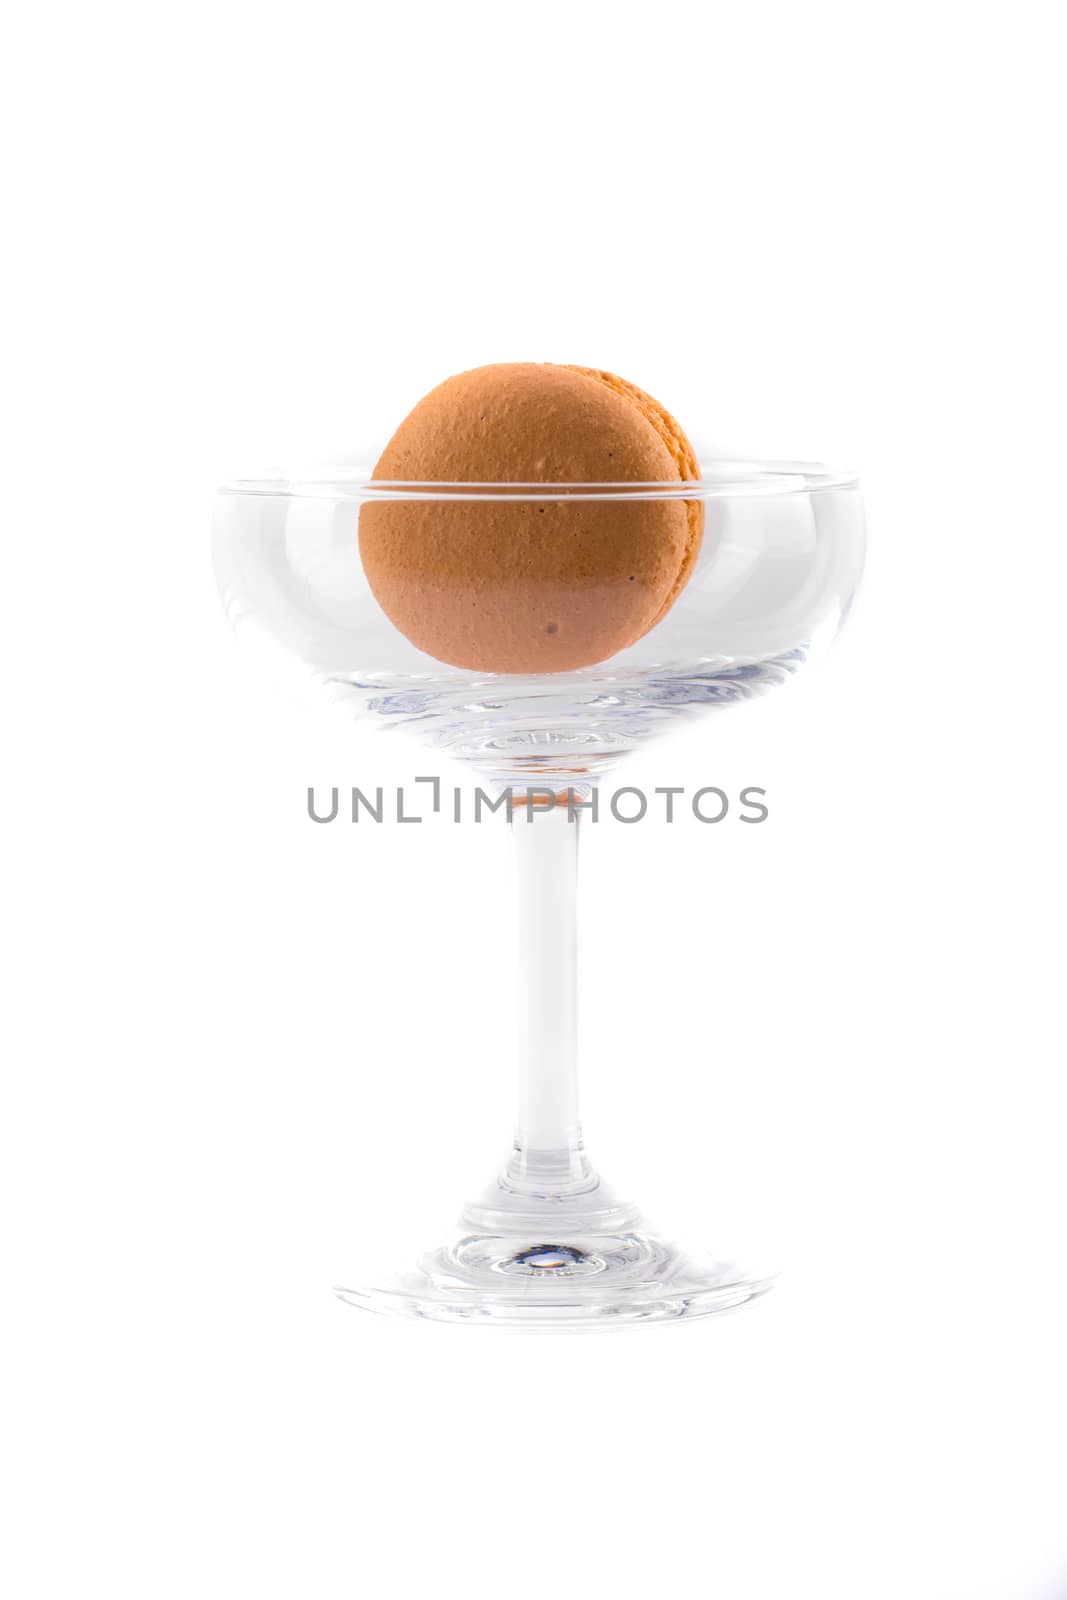 an orange flavored macaroon with orange jam filling in a clear glass, isolated on white background